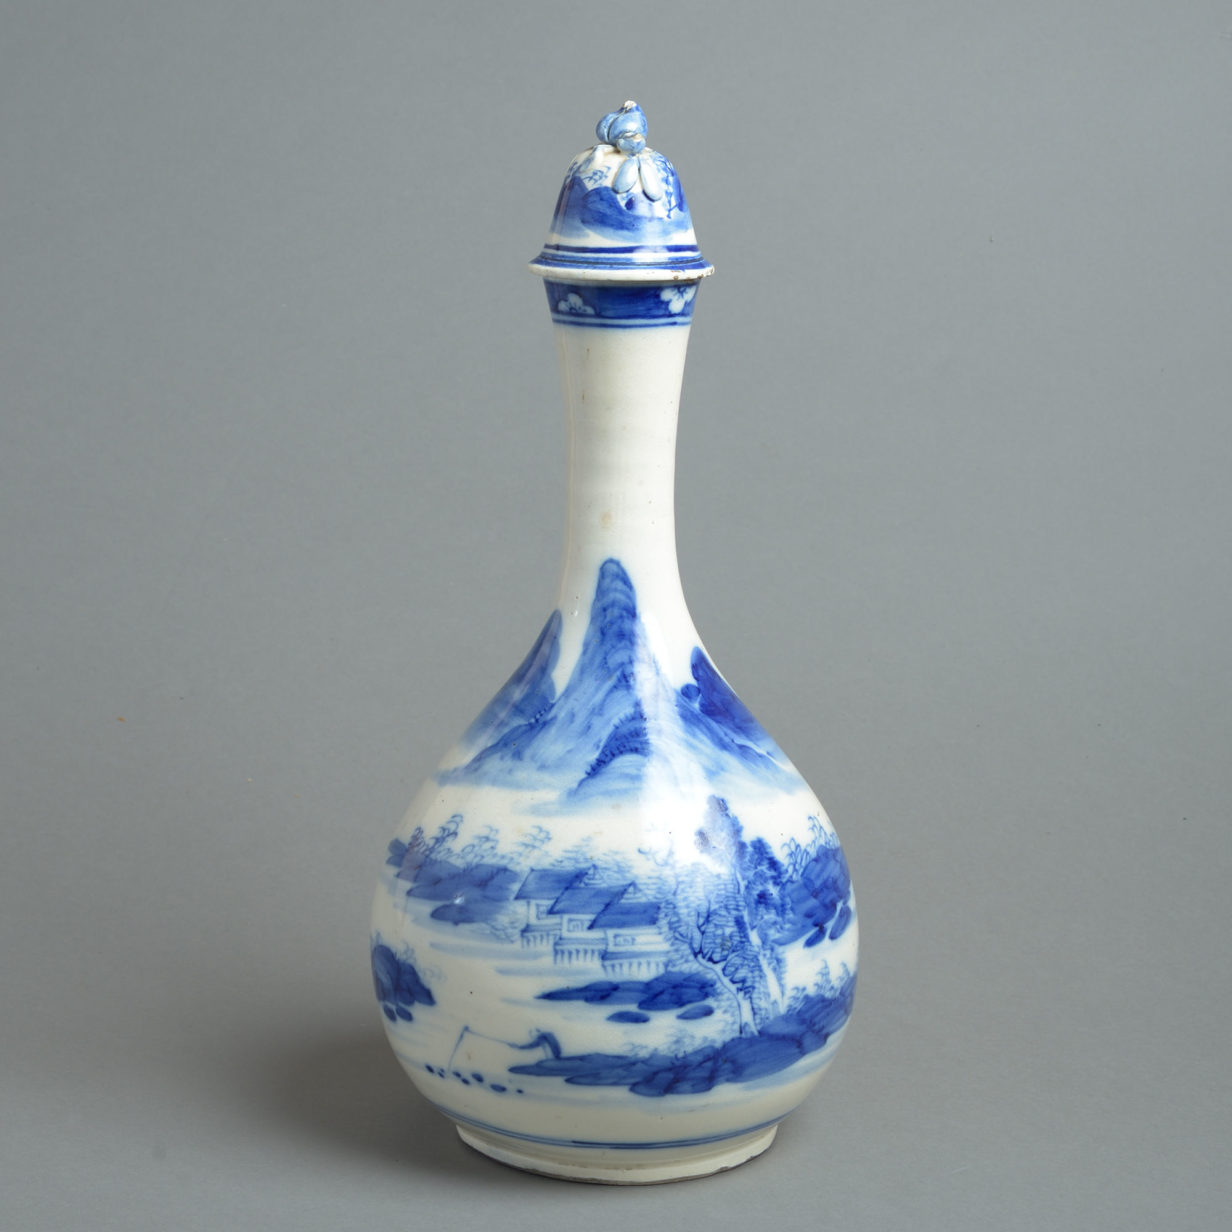 19th century blue and white porcelain vase with stopper